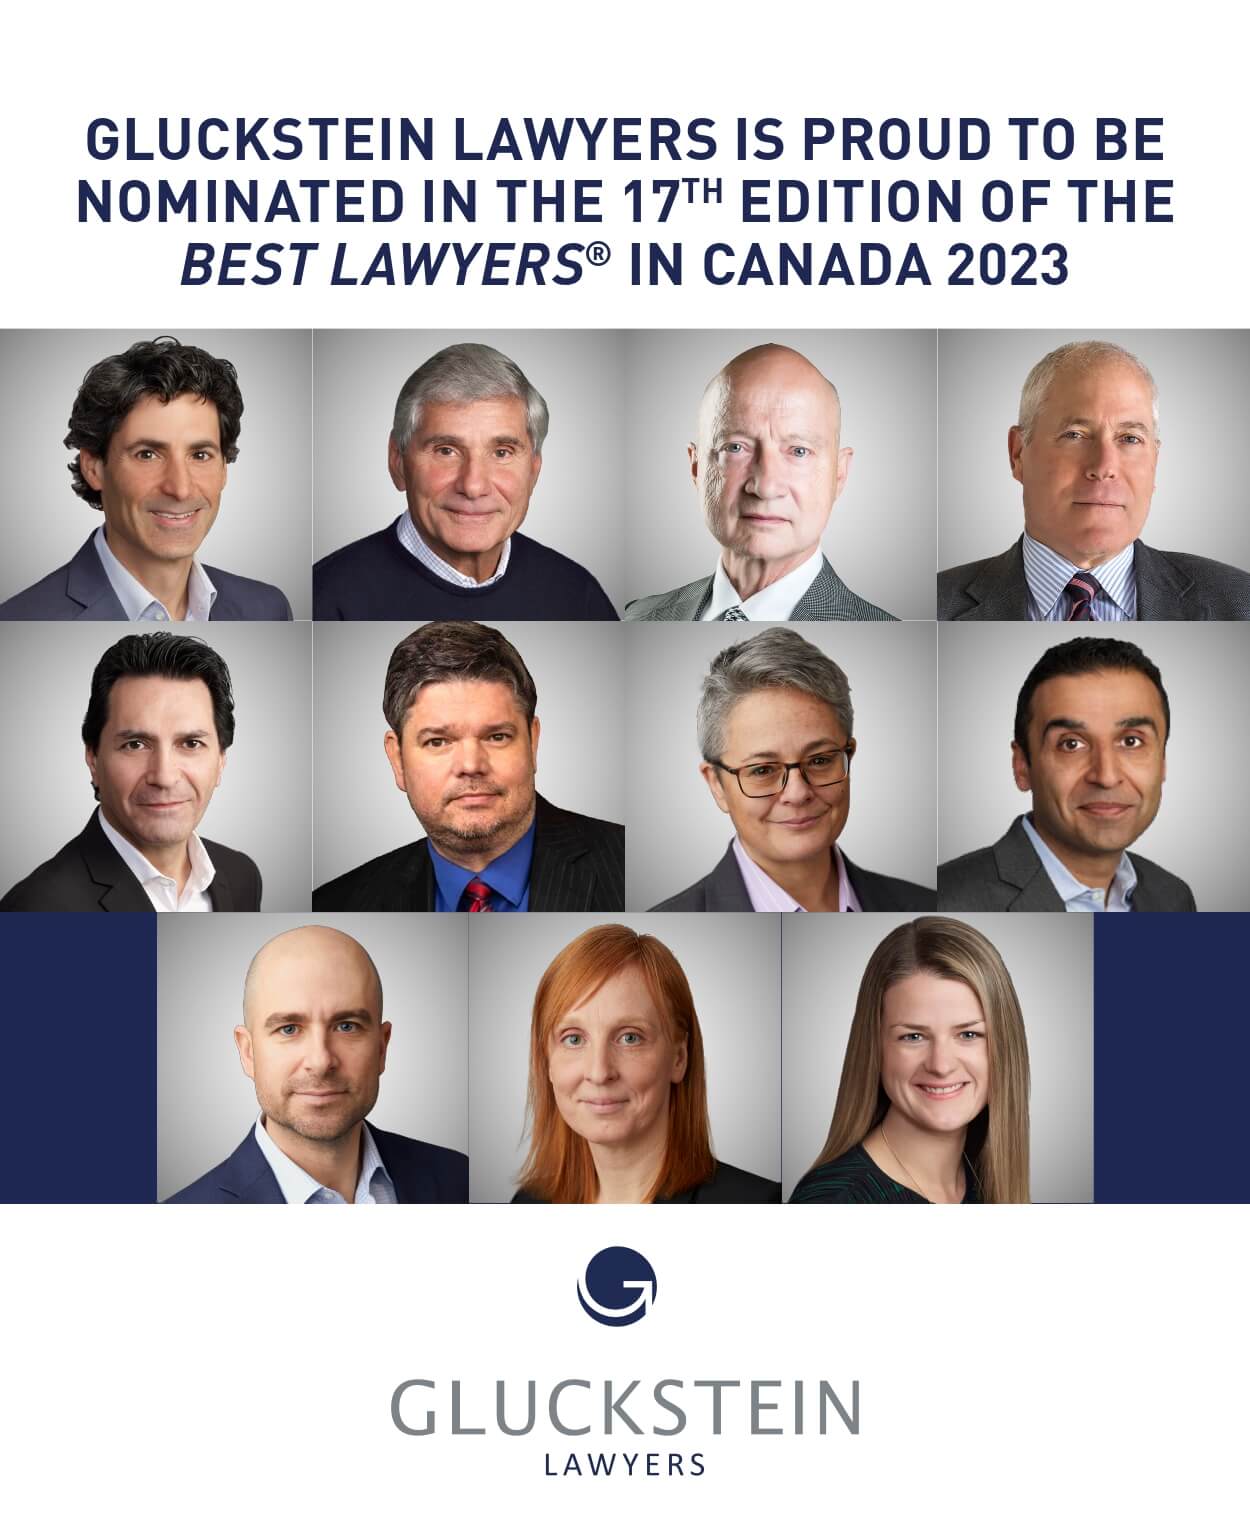 Gluckstein Lawyers is proud to be nominated for The Best Lawyers in Canada 2023